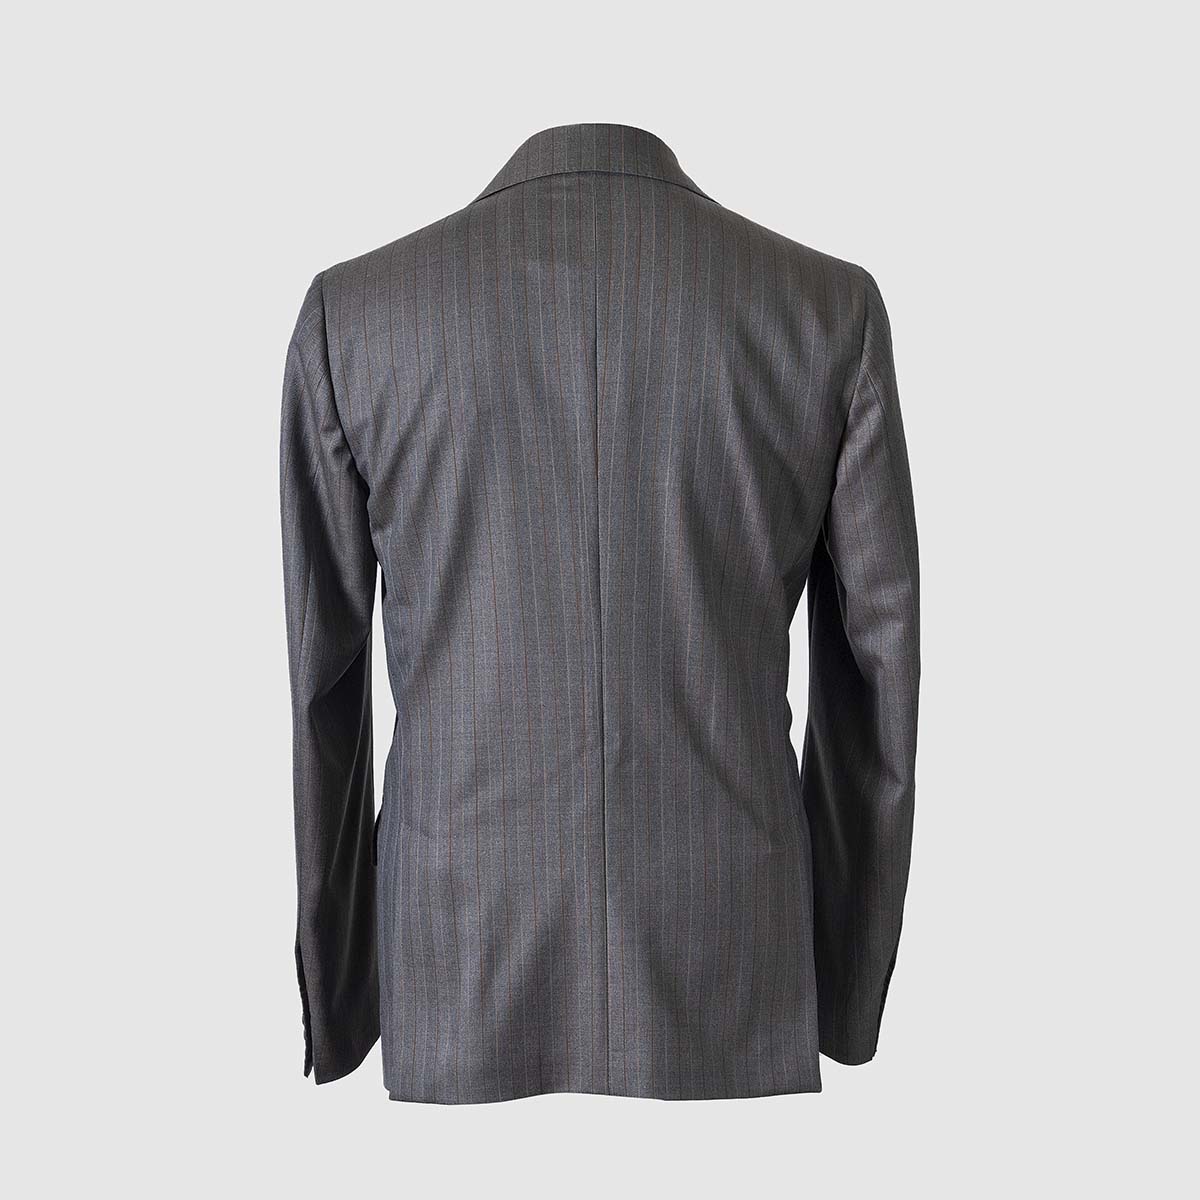 Double-Breasted Striped Suit in 130s Carnet Wool Melillo 1970 on sale 2022 2